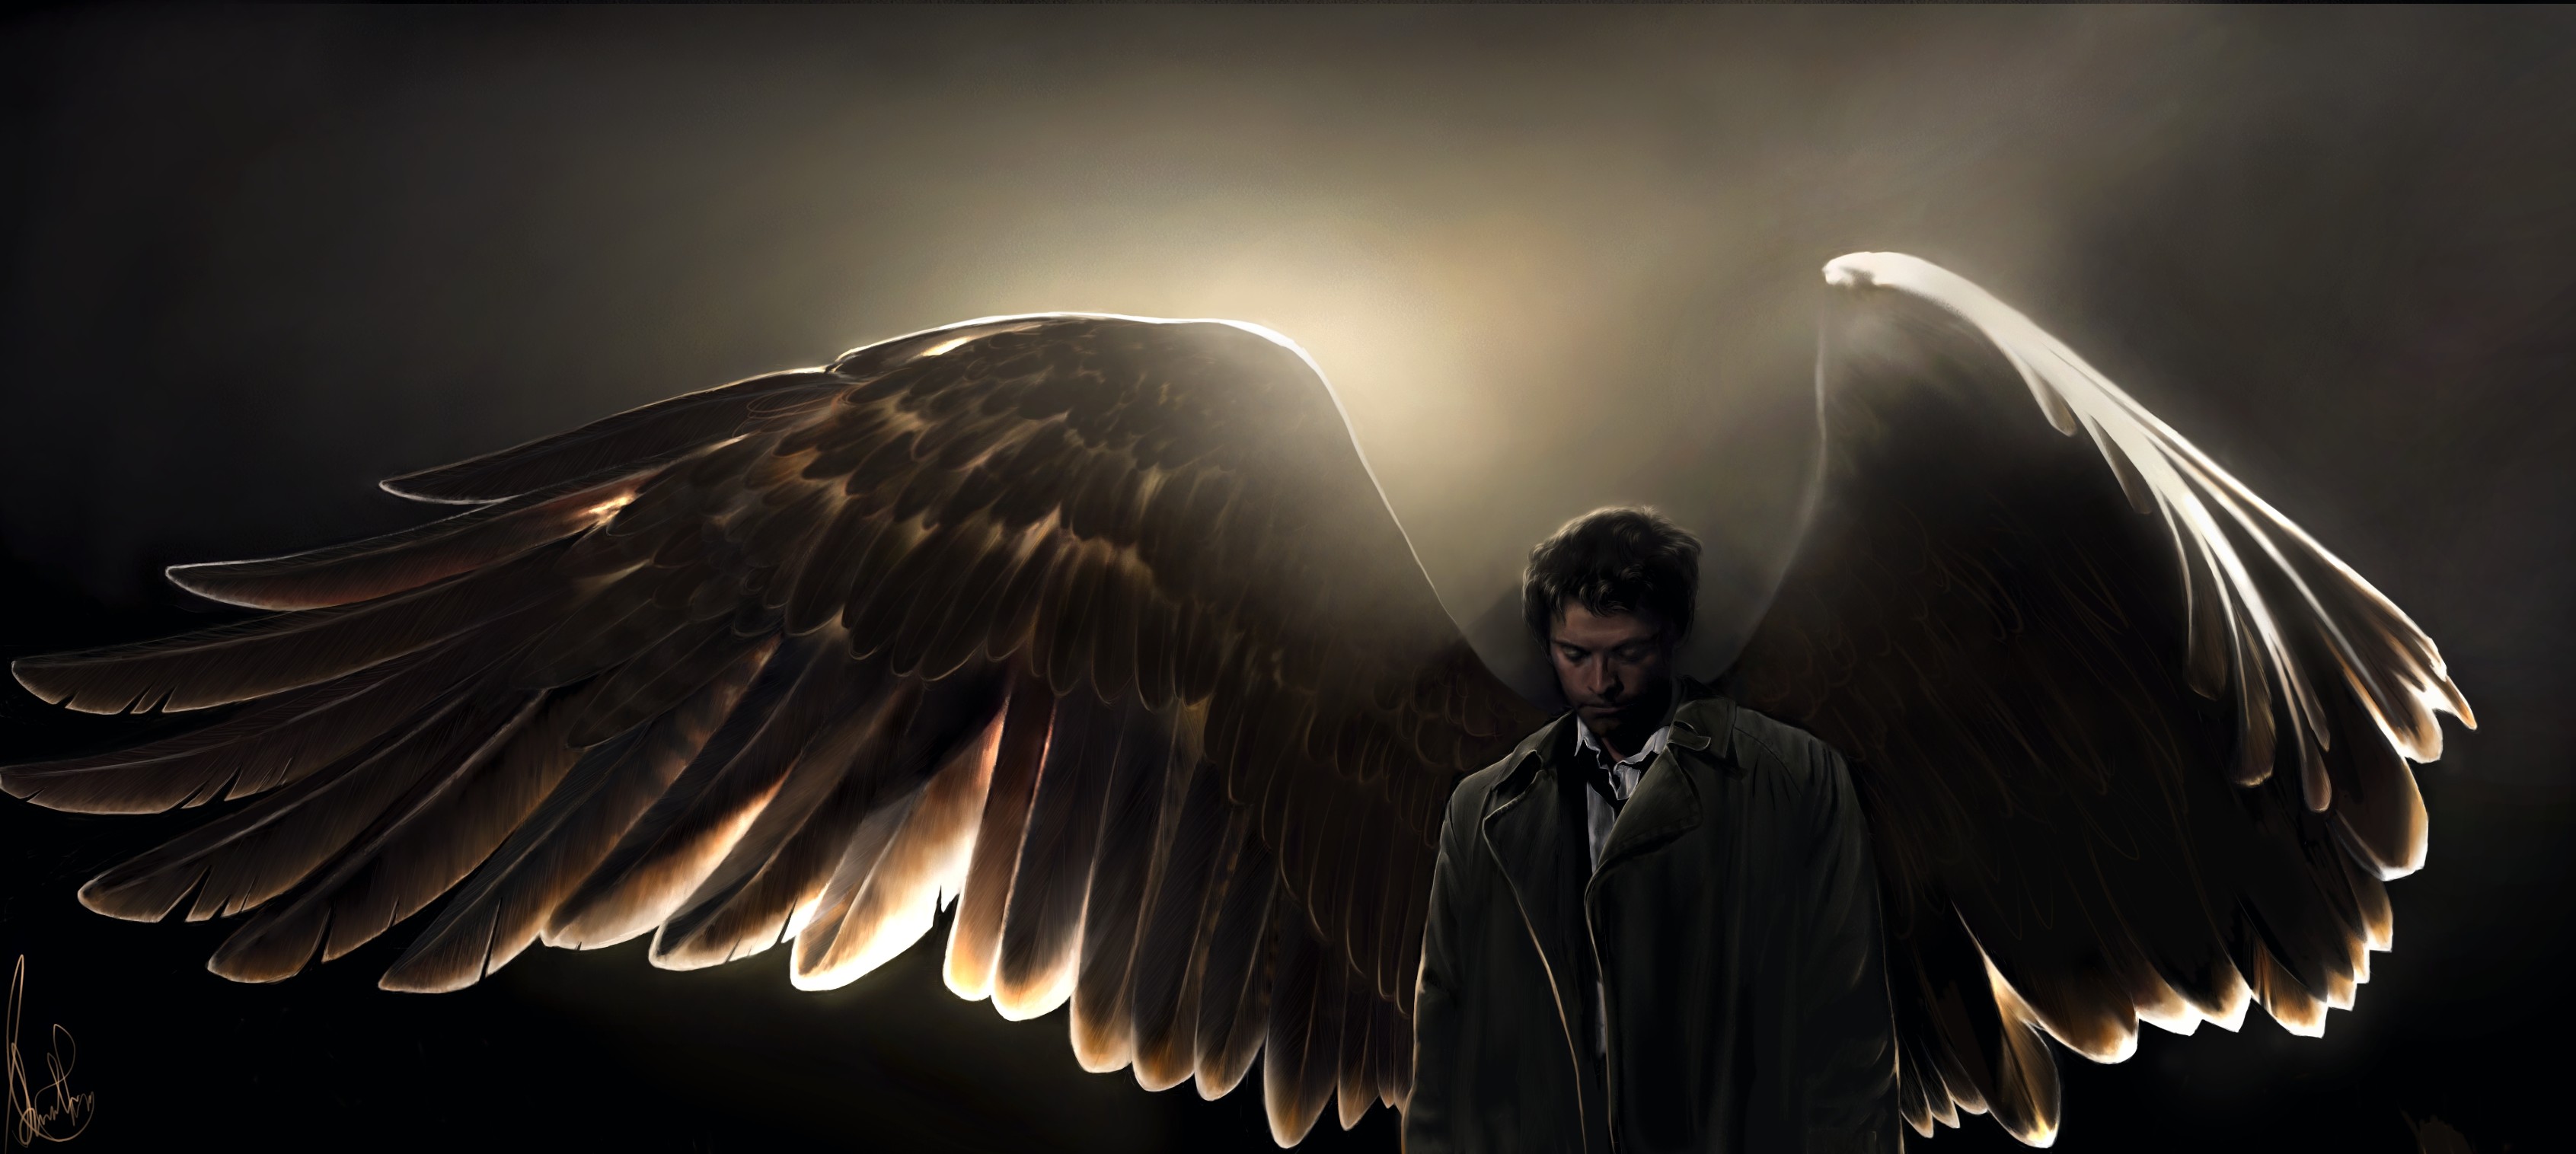 3383x1516 HD Wallpaper | Background Image ID:552922.  TV Show Supernatural